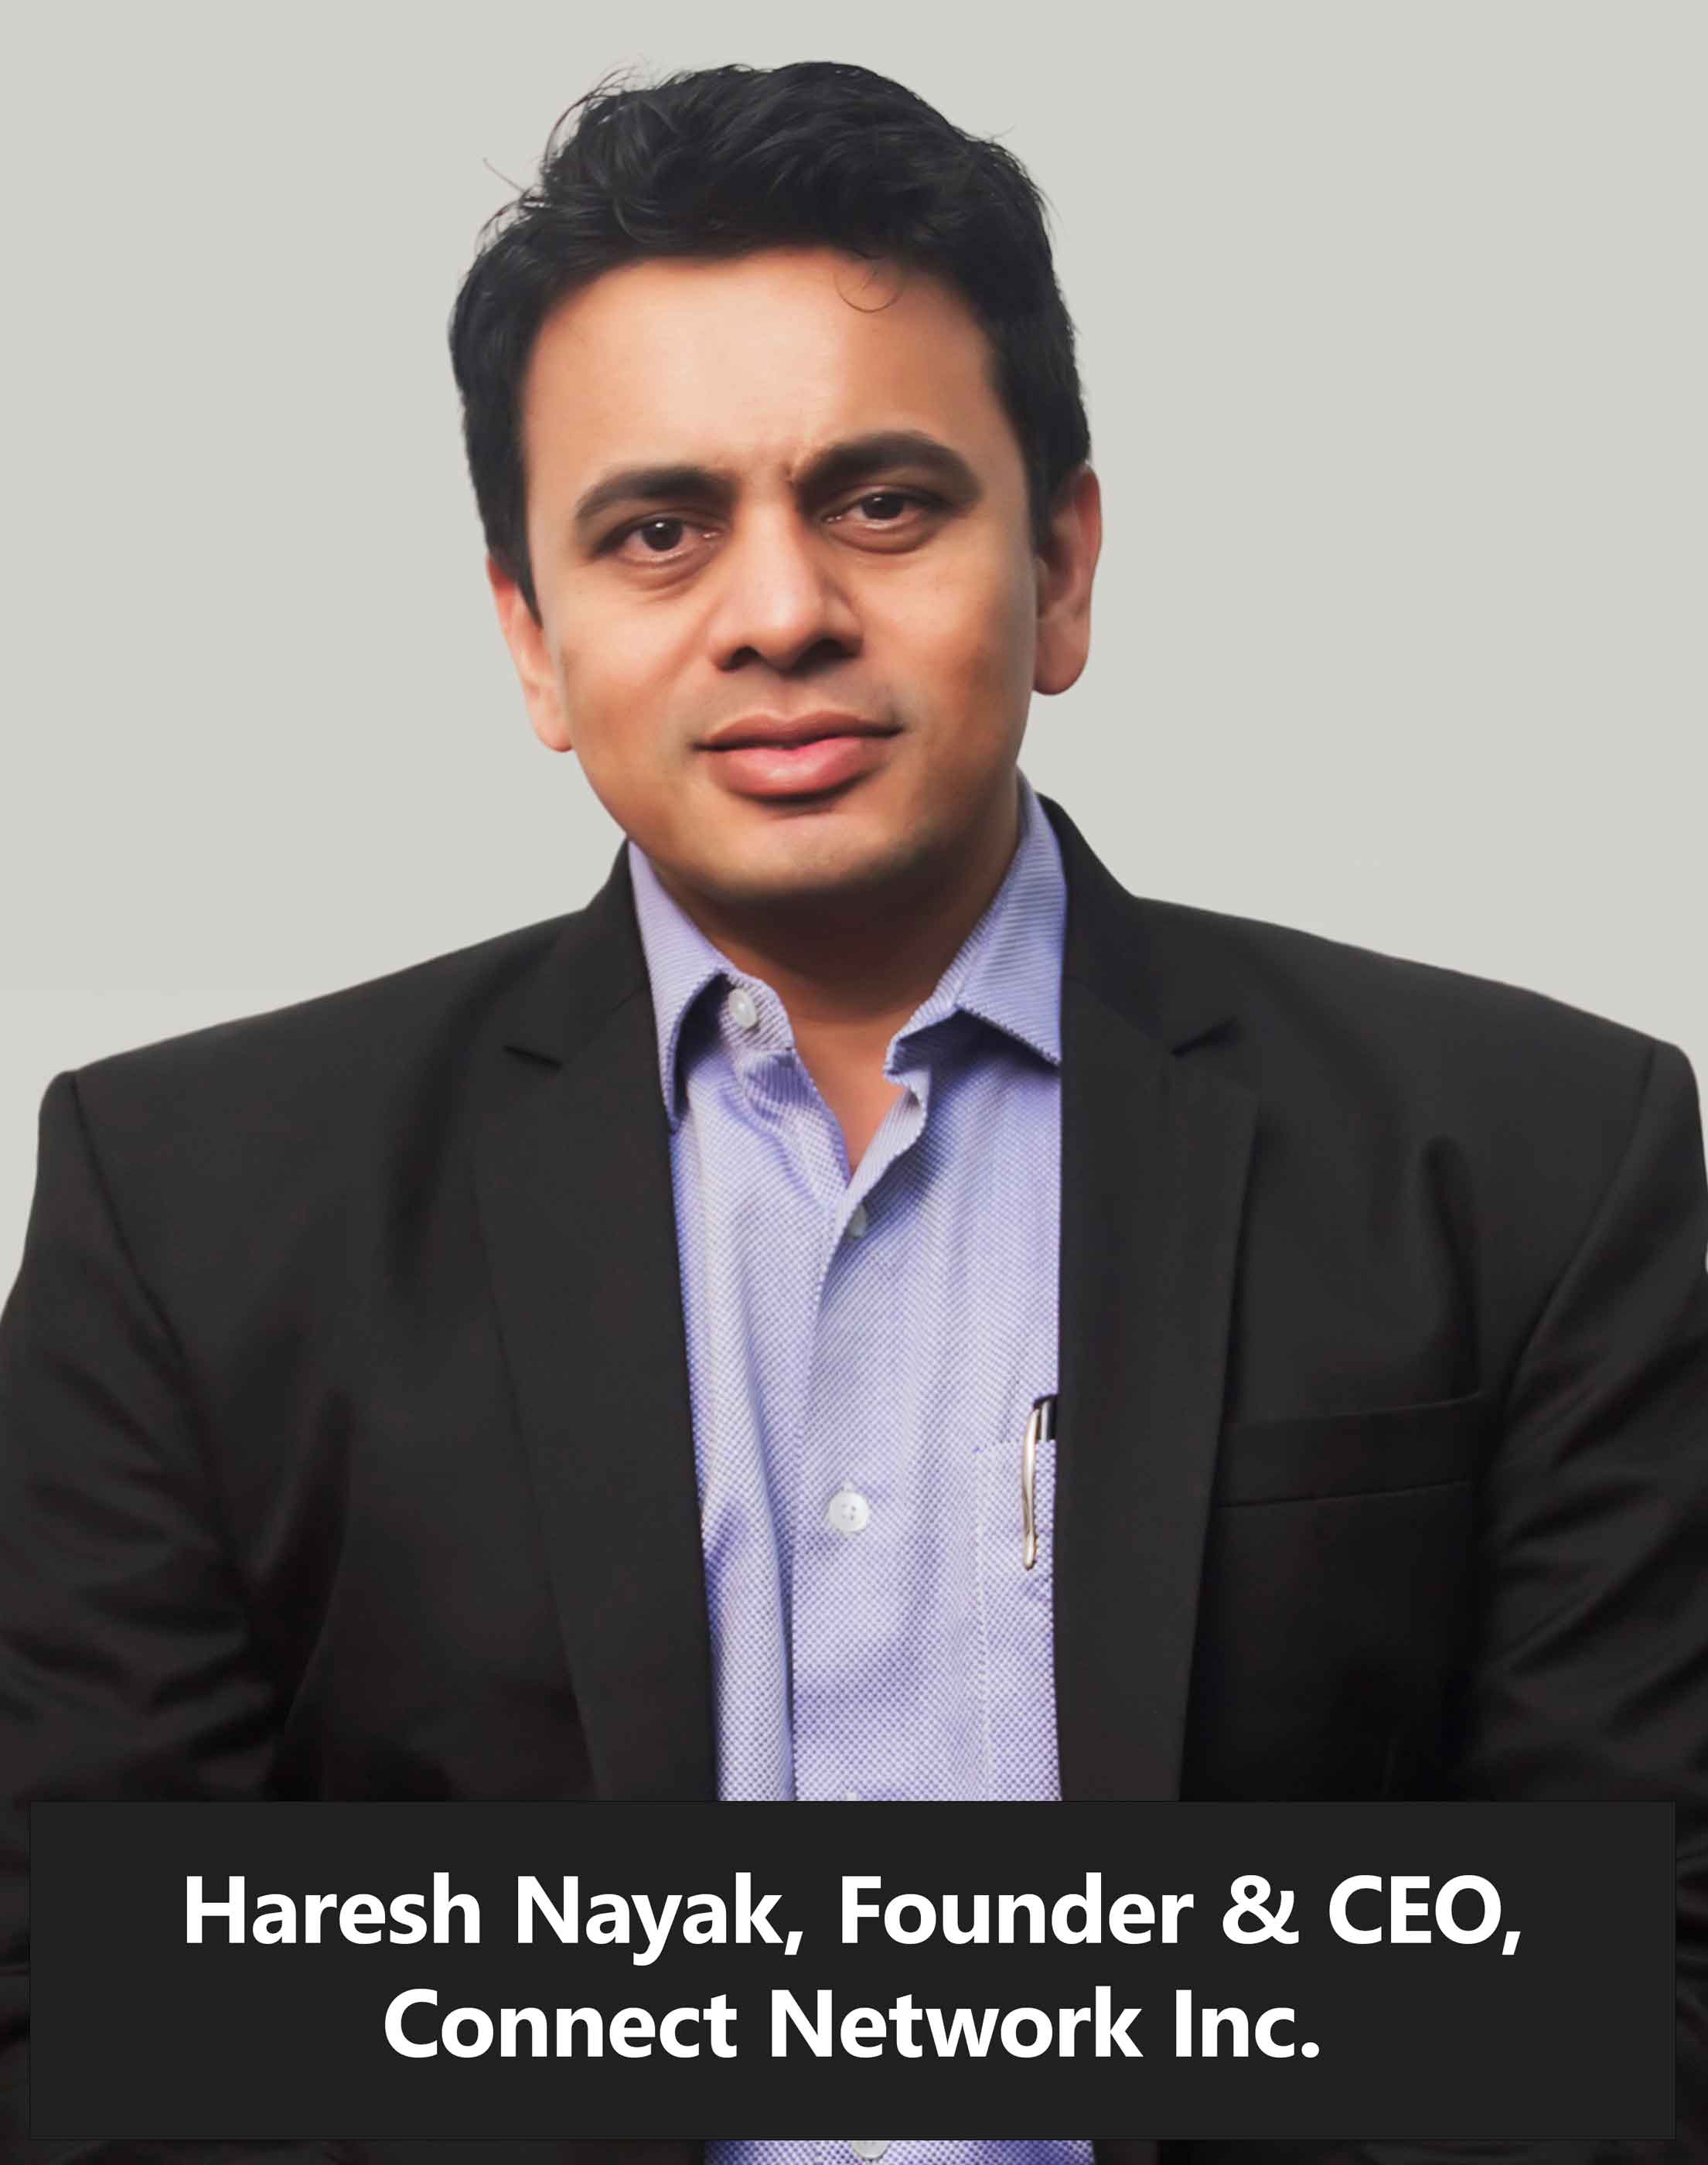 Haresh-Nayak,-Founder-&-CEO,-Connect-Network-Inc